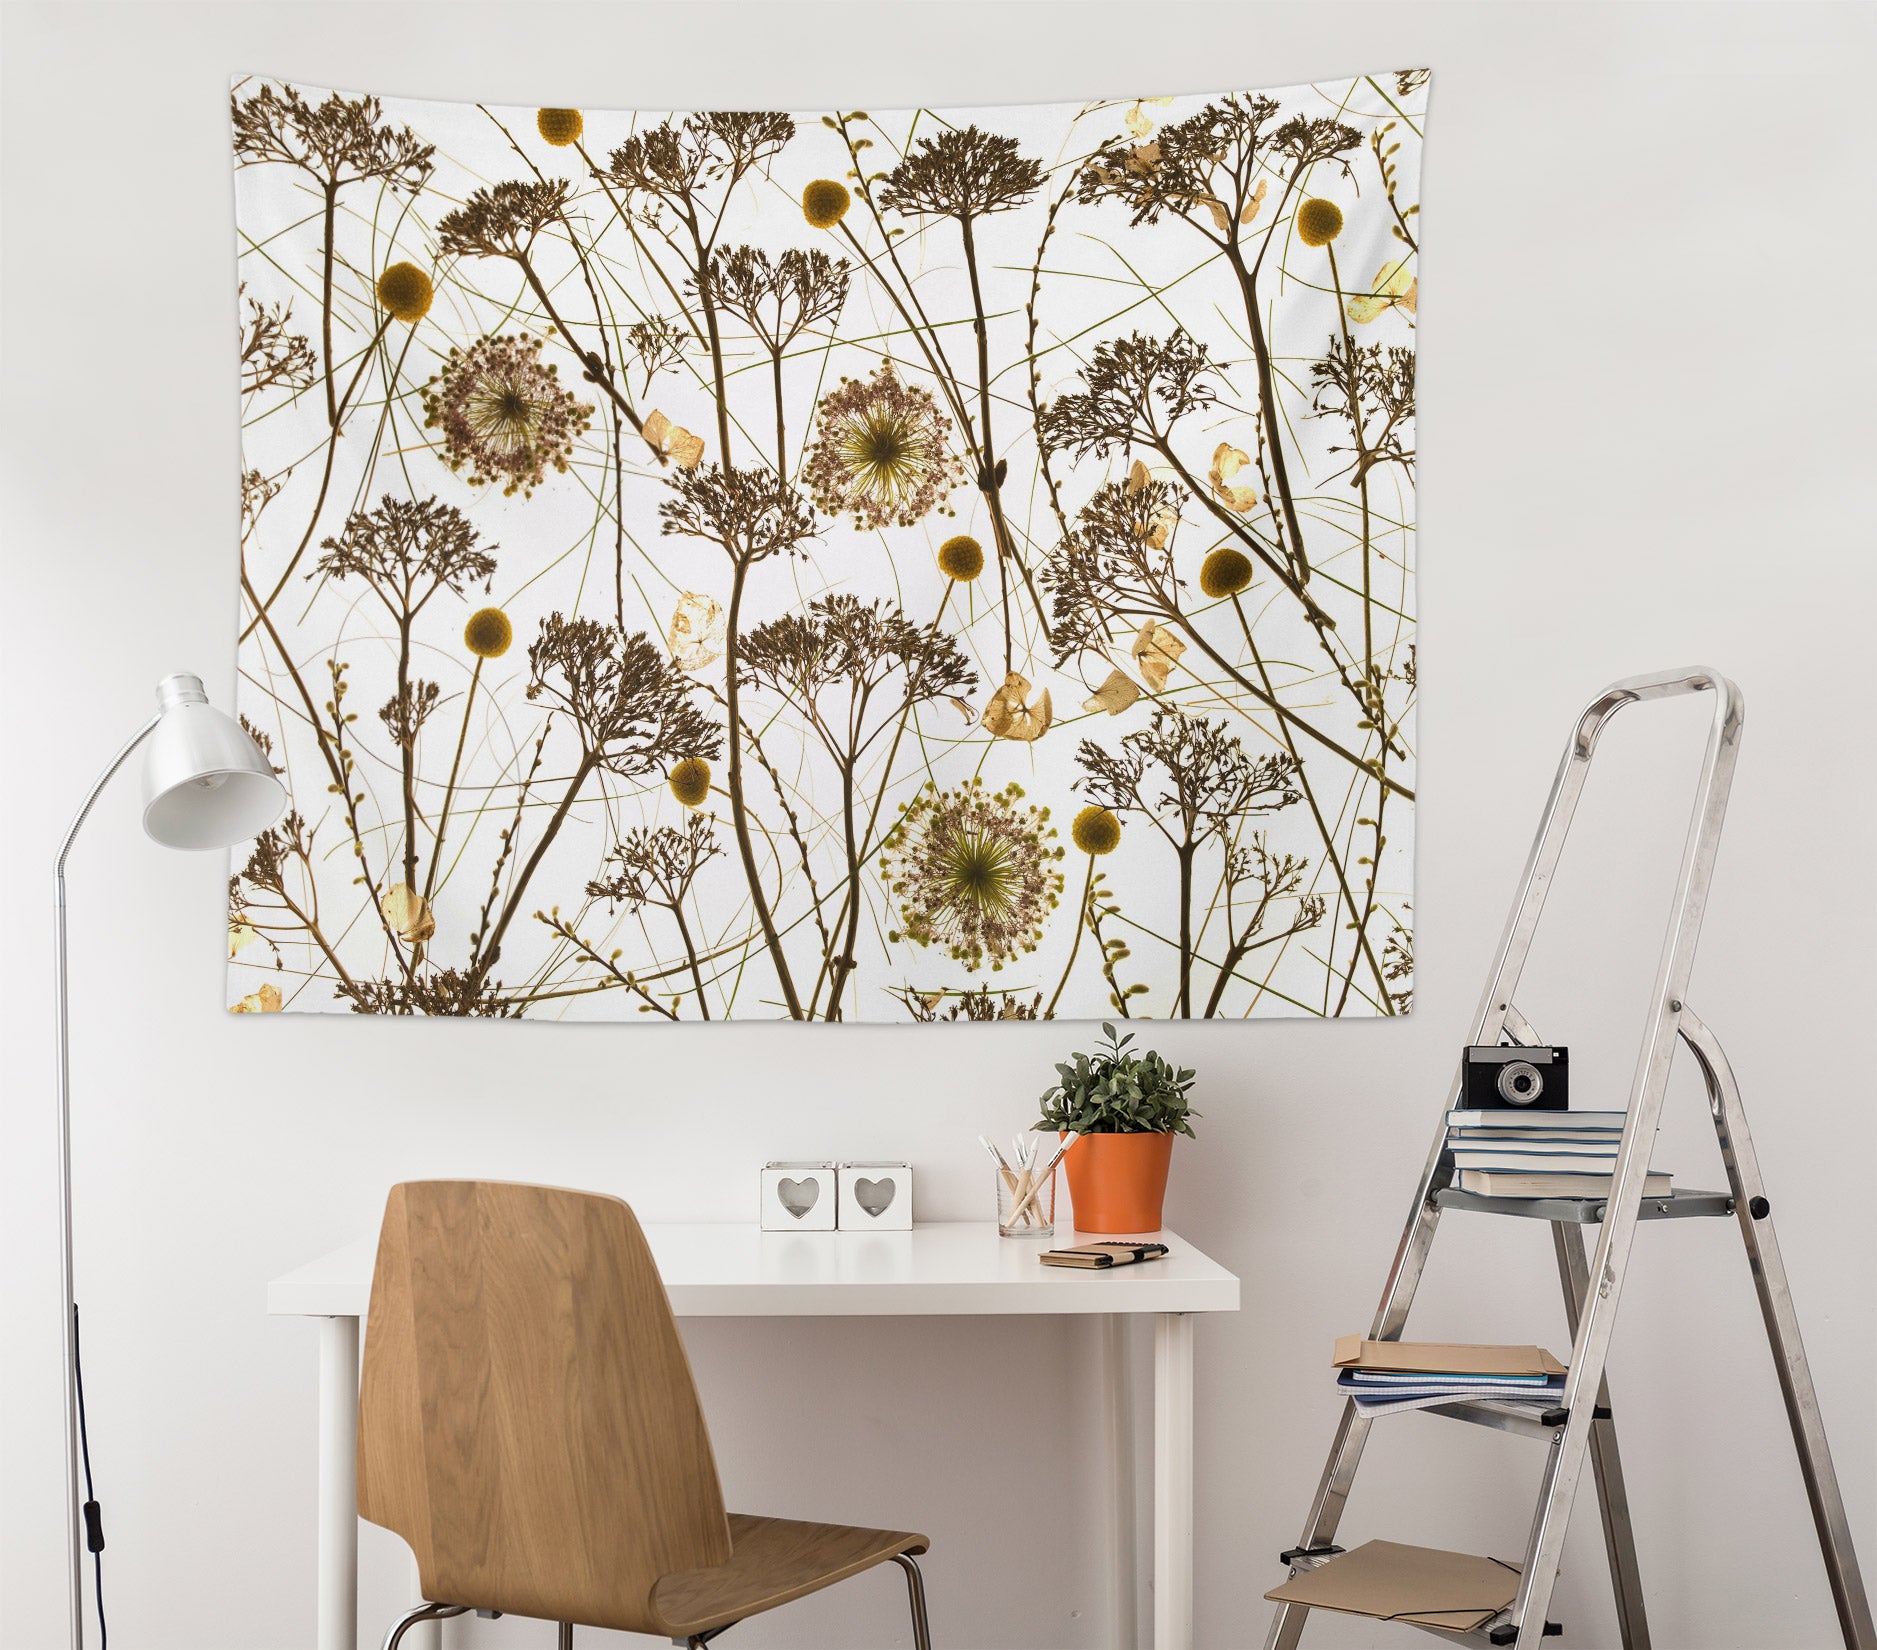 3D Dried Flowers 11644 Assaf Frank Tapestry Hanging Cloth Hang